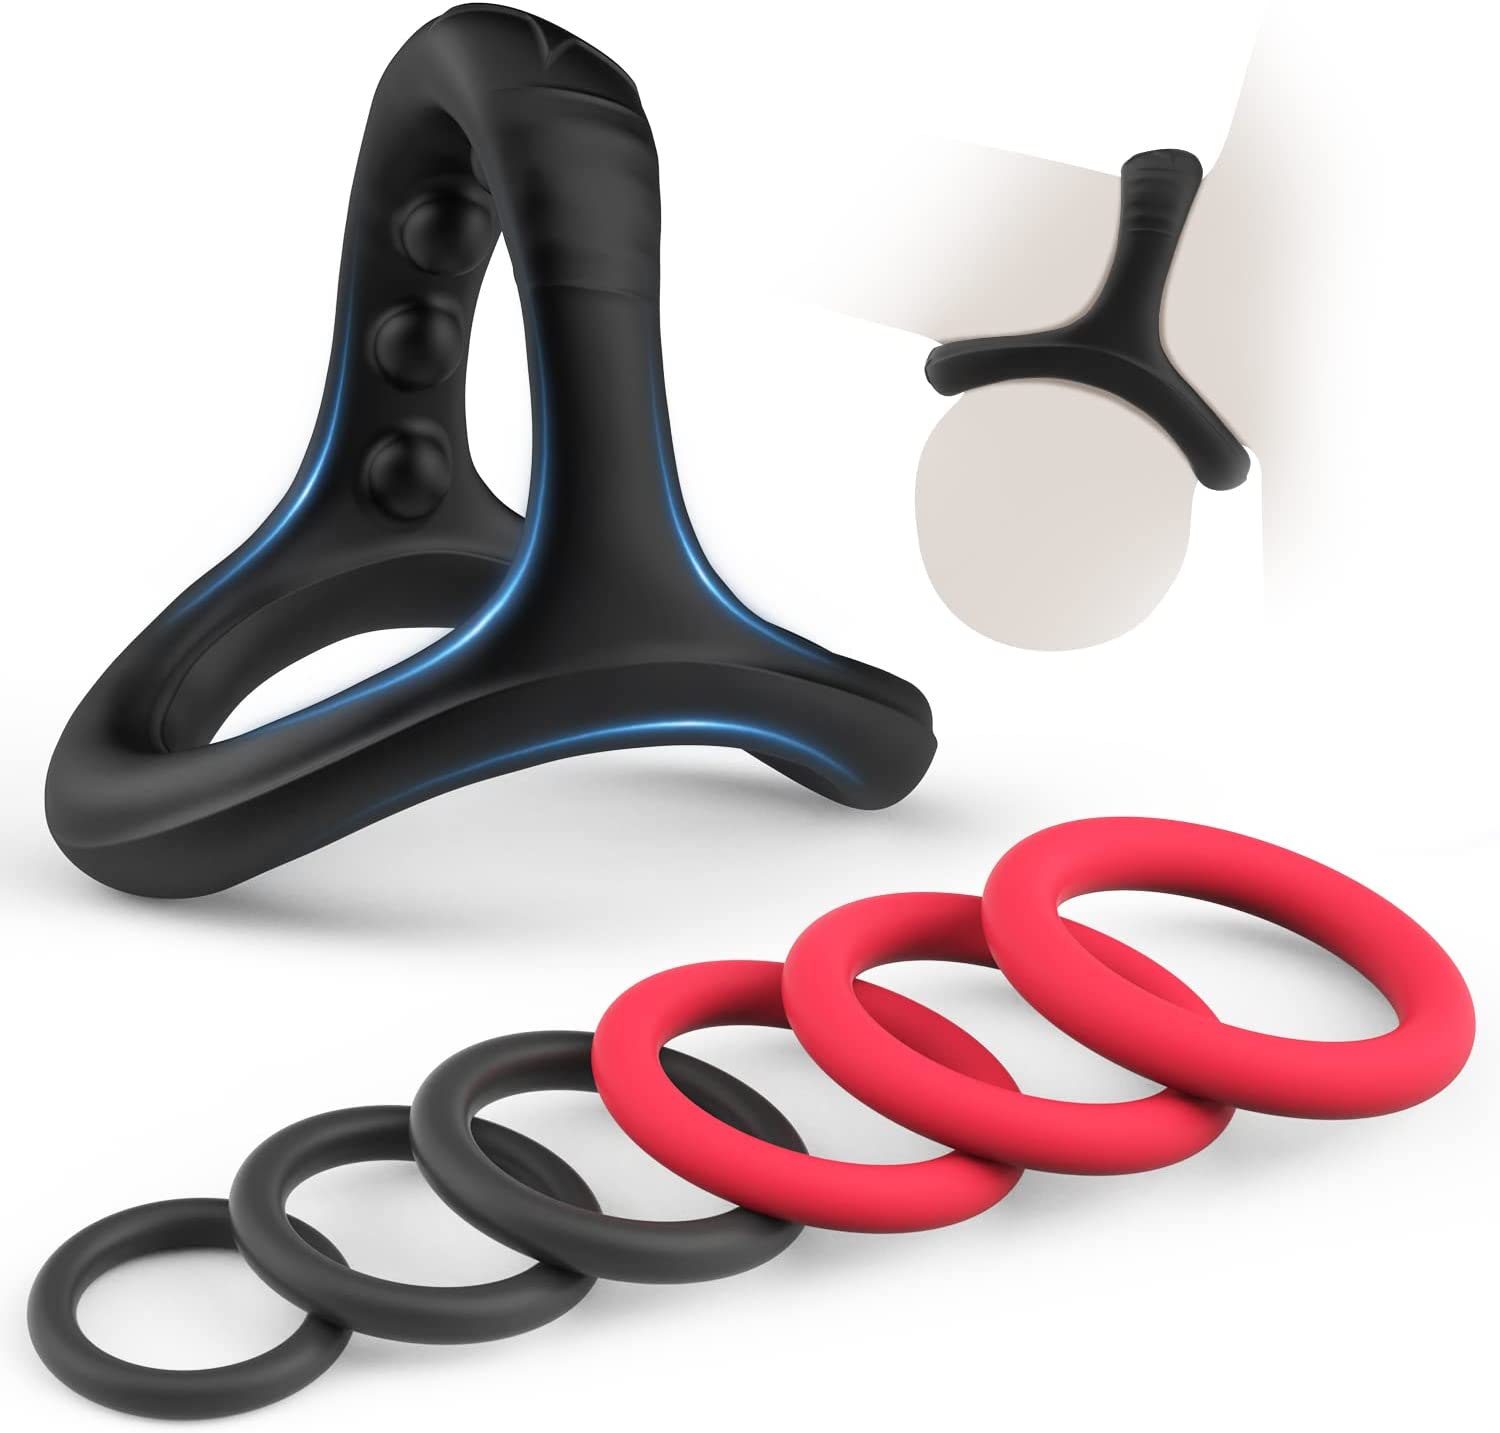 Beauty Molly Superior Silicon Flat Penis Cock Ring Set Crings Erection  Enhancing c-Ring for Men Adult Sex Toys, 3 Rings